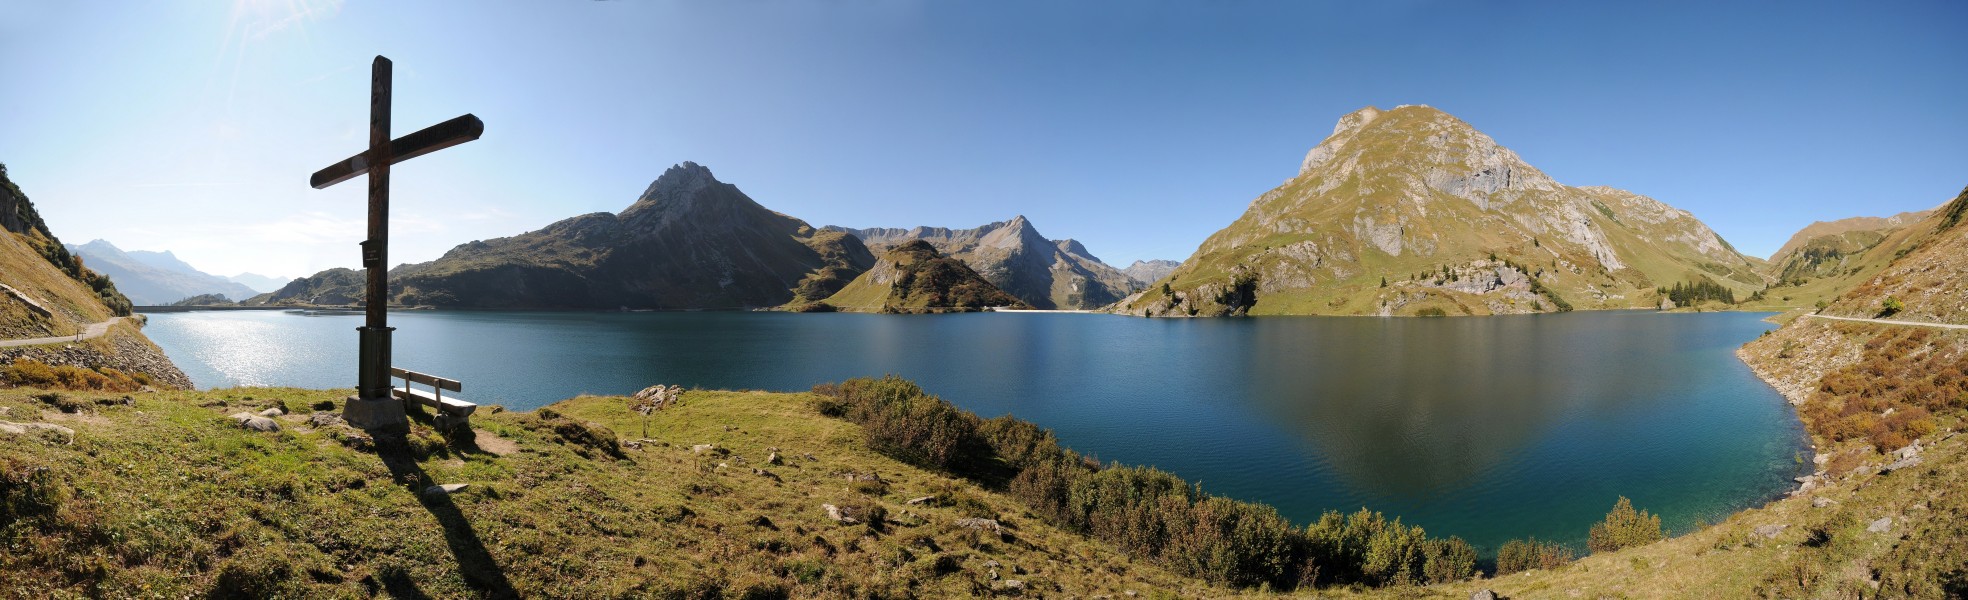 Speicher Spullersee Panorama